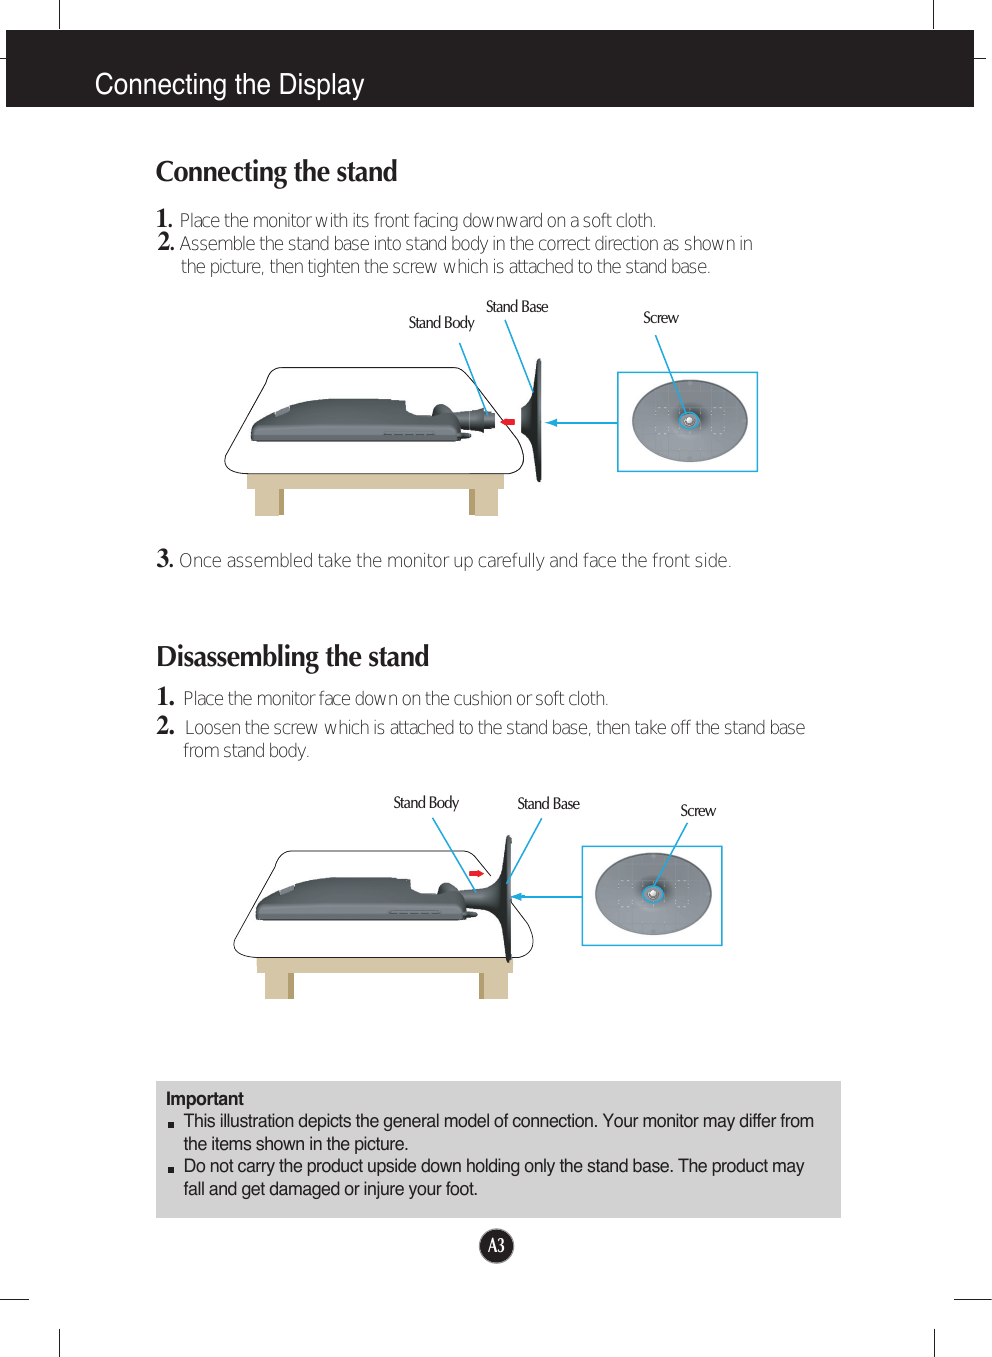 A3Disassembling the stand1. Place the monitor face down on the cushion or soft cloth.2.  Loosen the screw which is attached to the stand base, then take off the stand basefrom stand body.Connecting the DisplayImportantThis illustration depicts the general model of connection. Your monitor may differ fromthe items shown in the picture.Do not carry the product upside down holding only the stand base. The product mayfall and get damaged or injure your foot.Connecting the stand 1.Place the monitor with its front facing downward on a soft cloth.2.Assemble the stand base into stand body in the correct direction as shown inthe picture, then tighten the screw which is attached to the stand base.Stand BaseStand Body3.Once assembled take the monitor up carefully and face the front side.ScrewStand BaseStand Body Screw